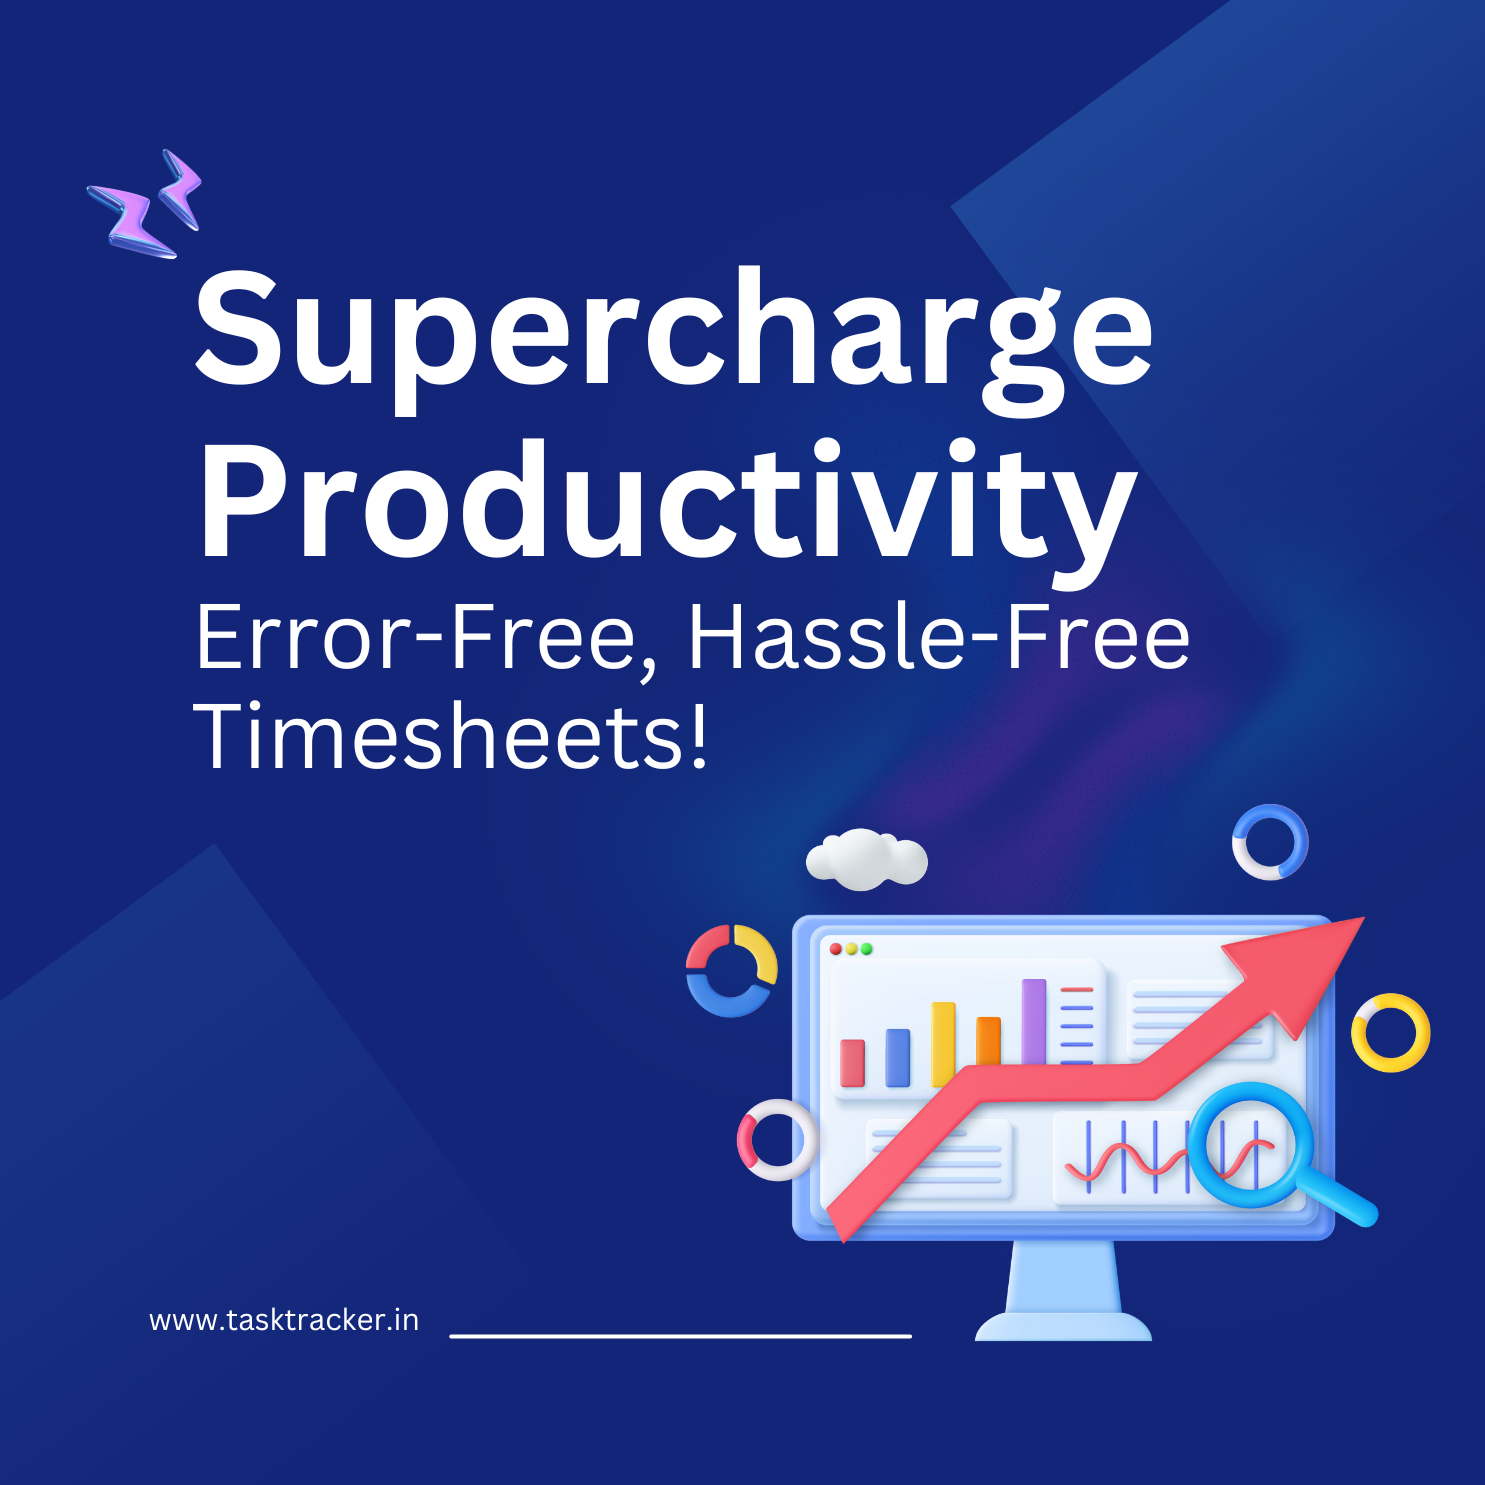 10X Your Productivity: Timesheets Made Easy With Task Tracking Tools